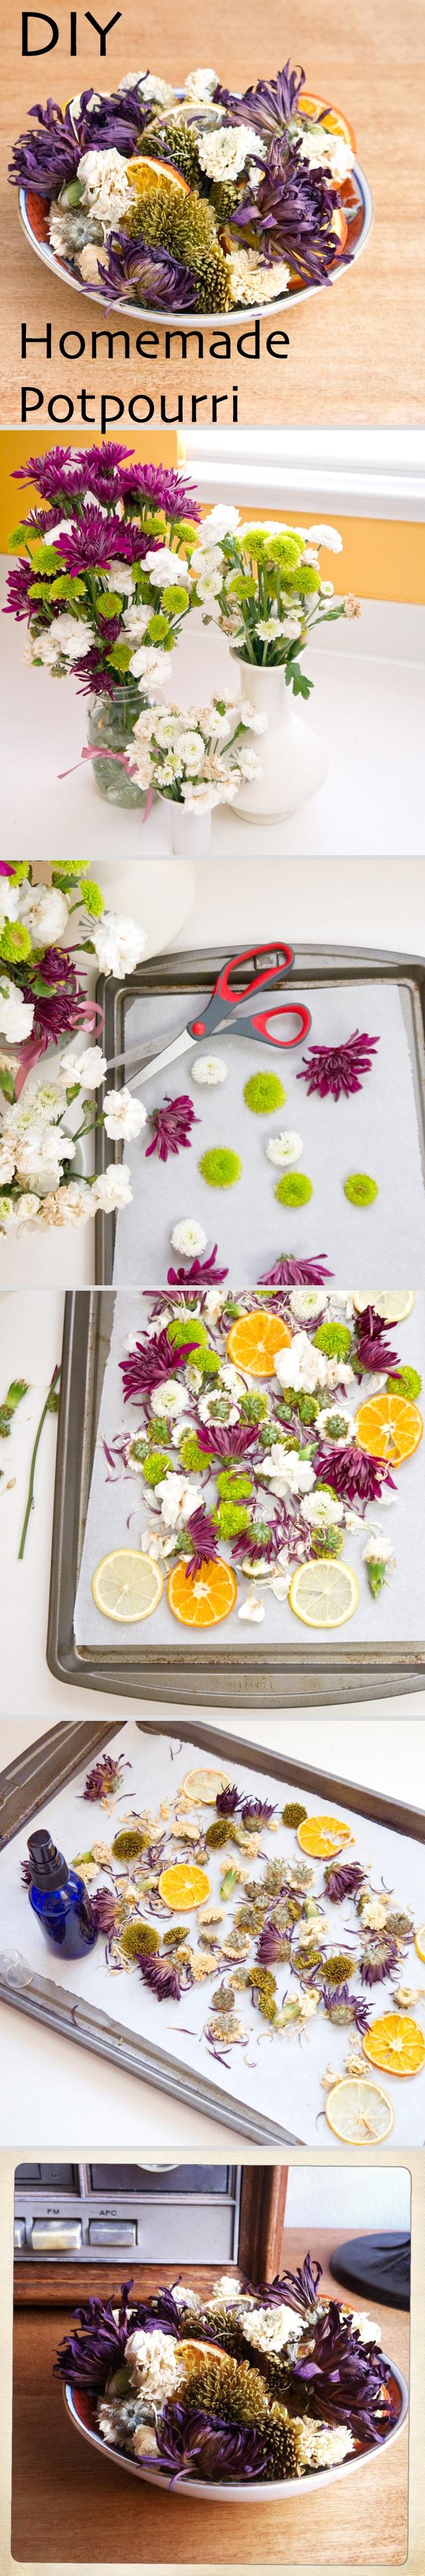 Mariage - Don't Toss Those Flowers! How To Make Homemade Potpourri